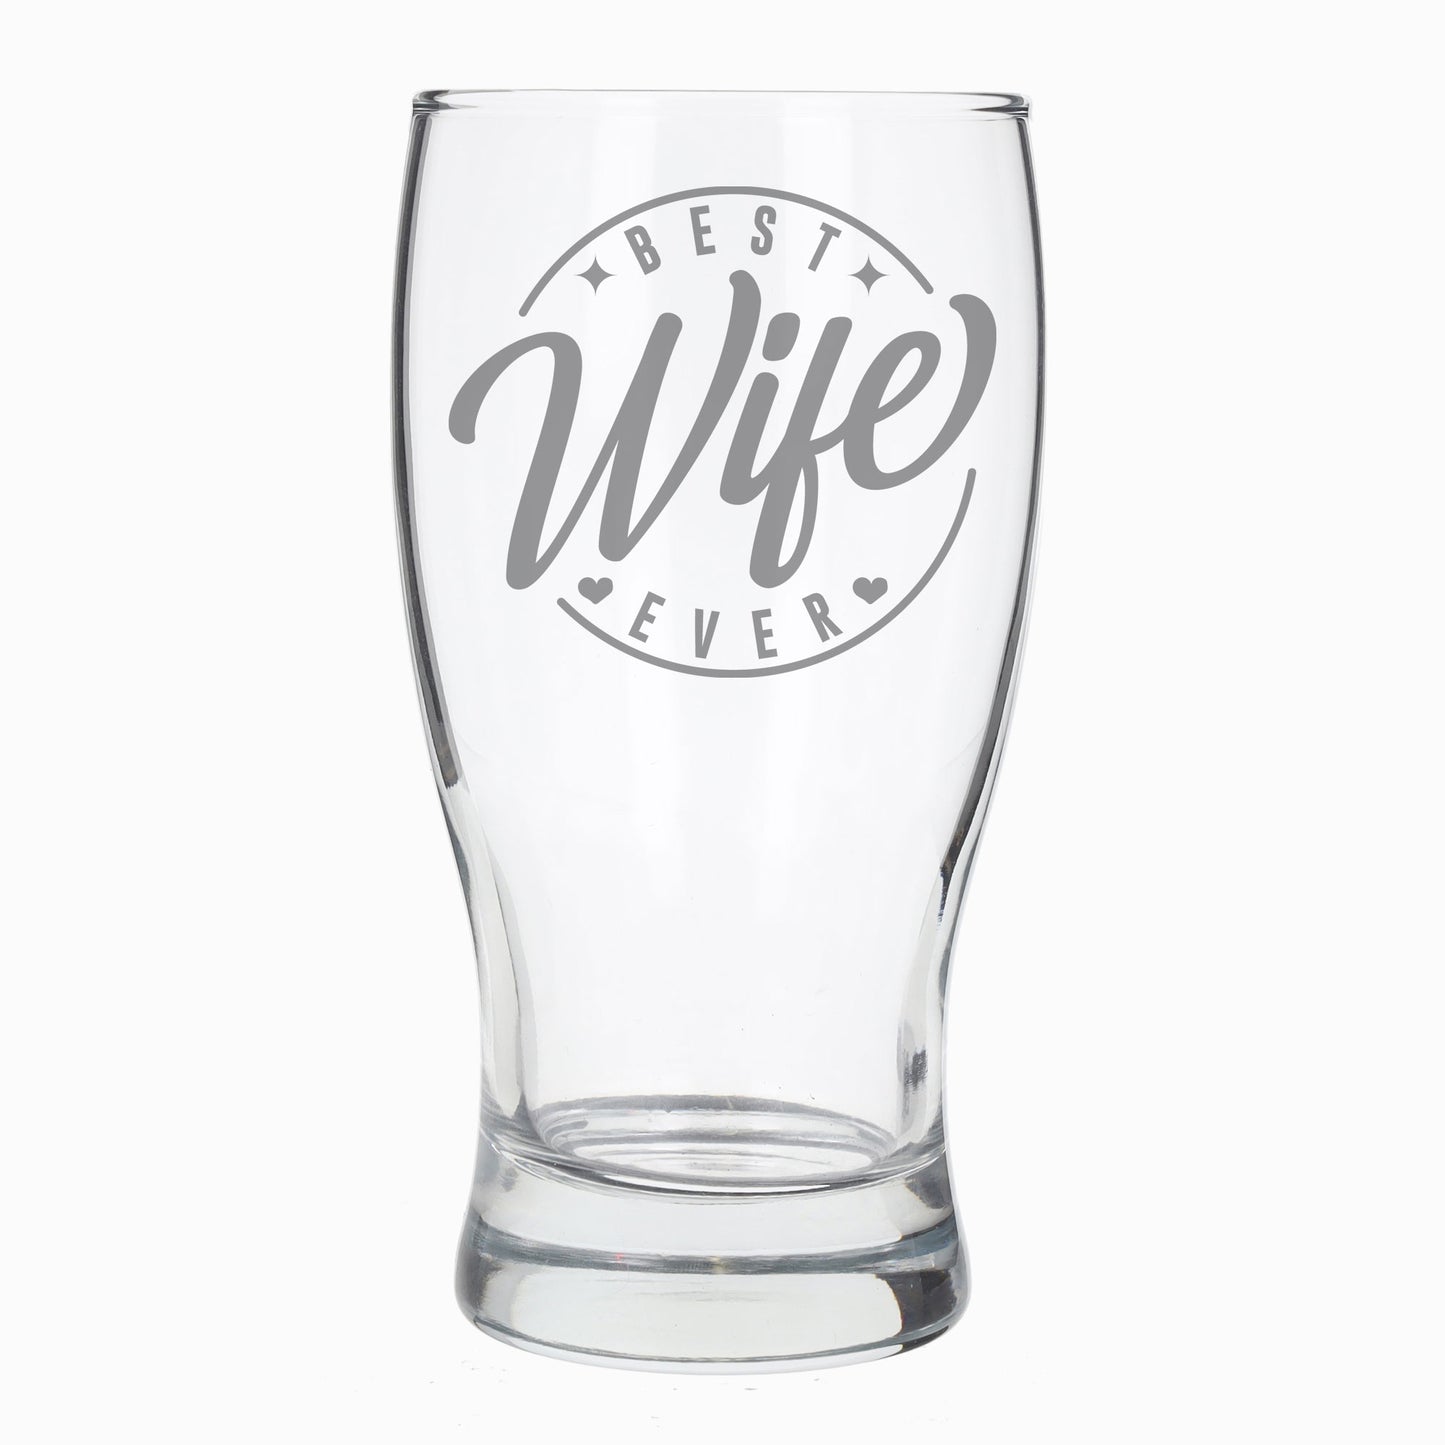 Best Wife Ever Engraved Beer Pint Glass and/or Coaster Set  - Always Looking Good - Beer Glass Only  